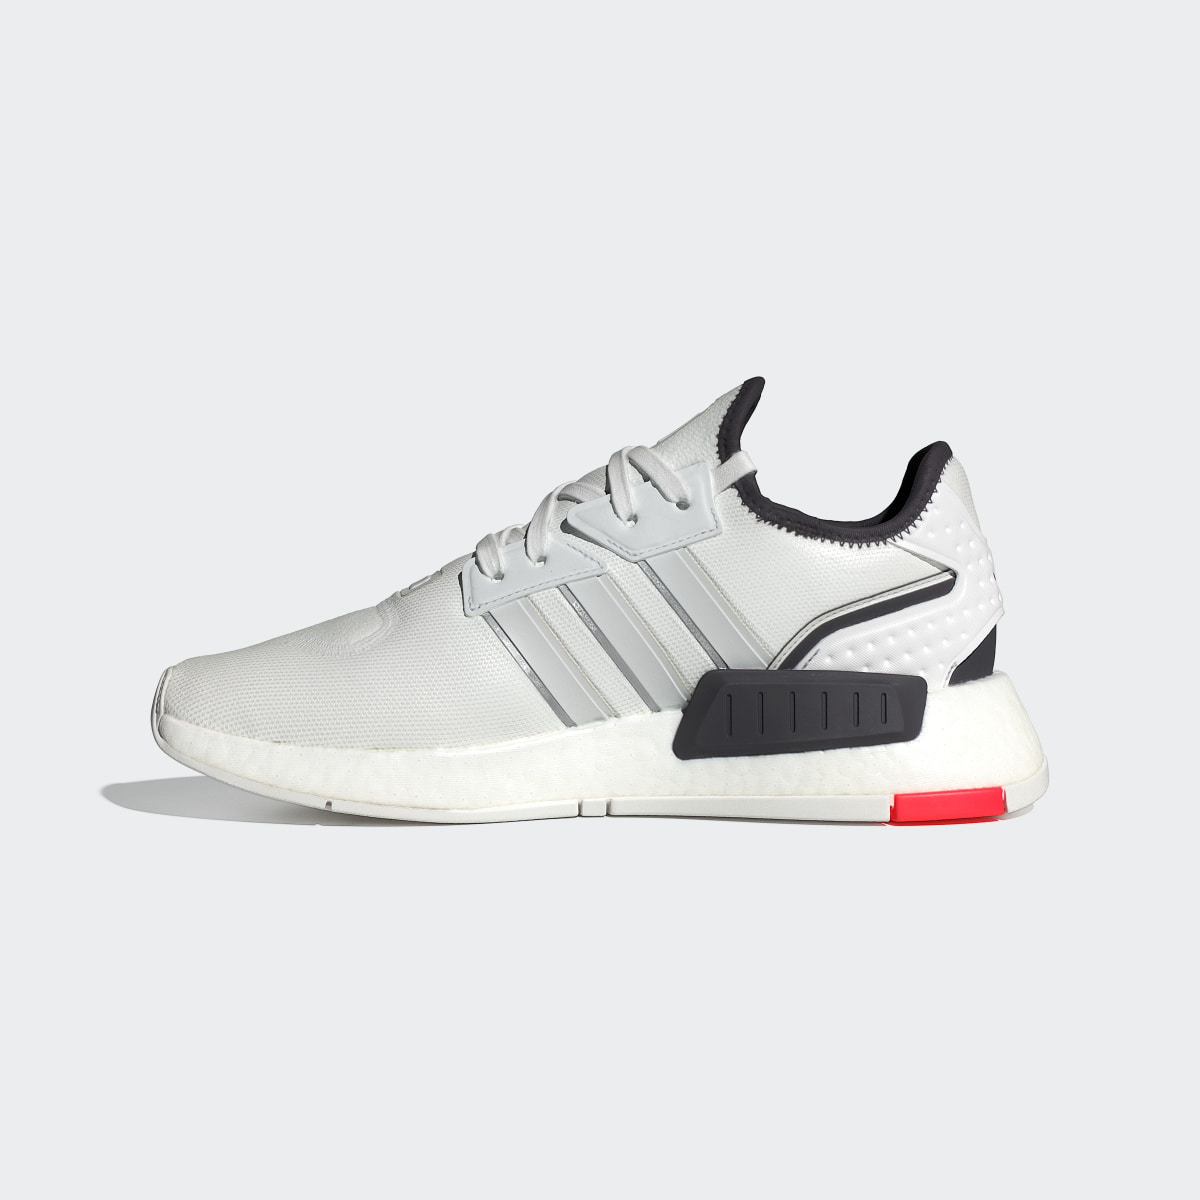 Adidas NMD_G1 Shoes. 7